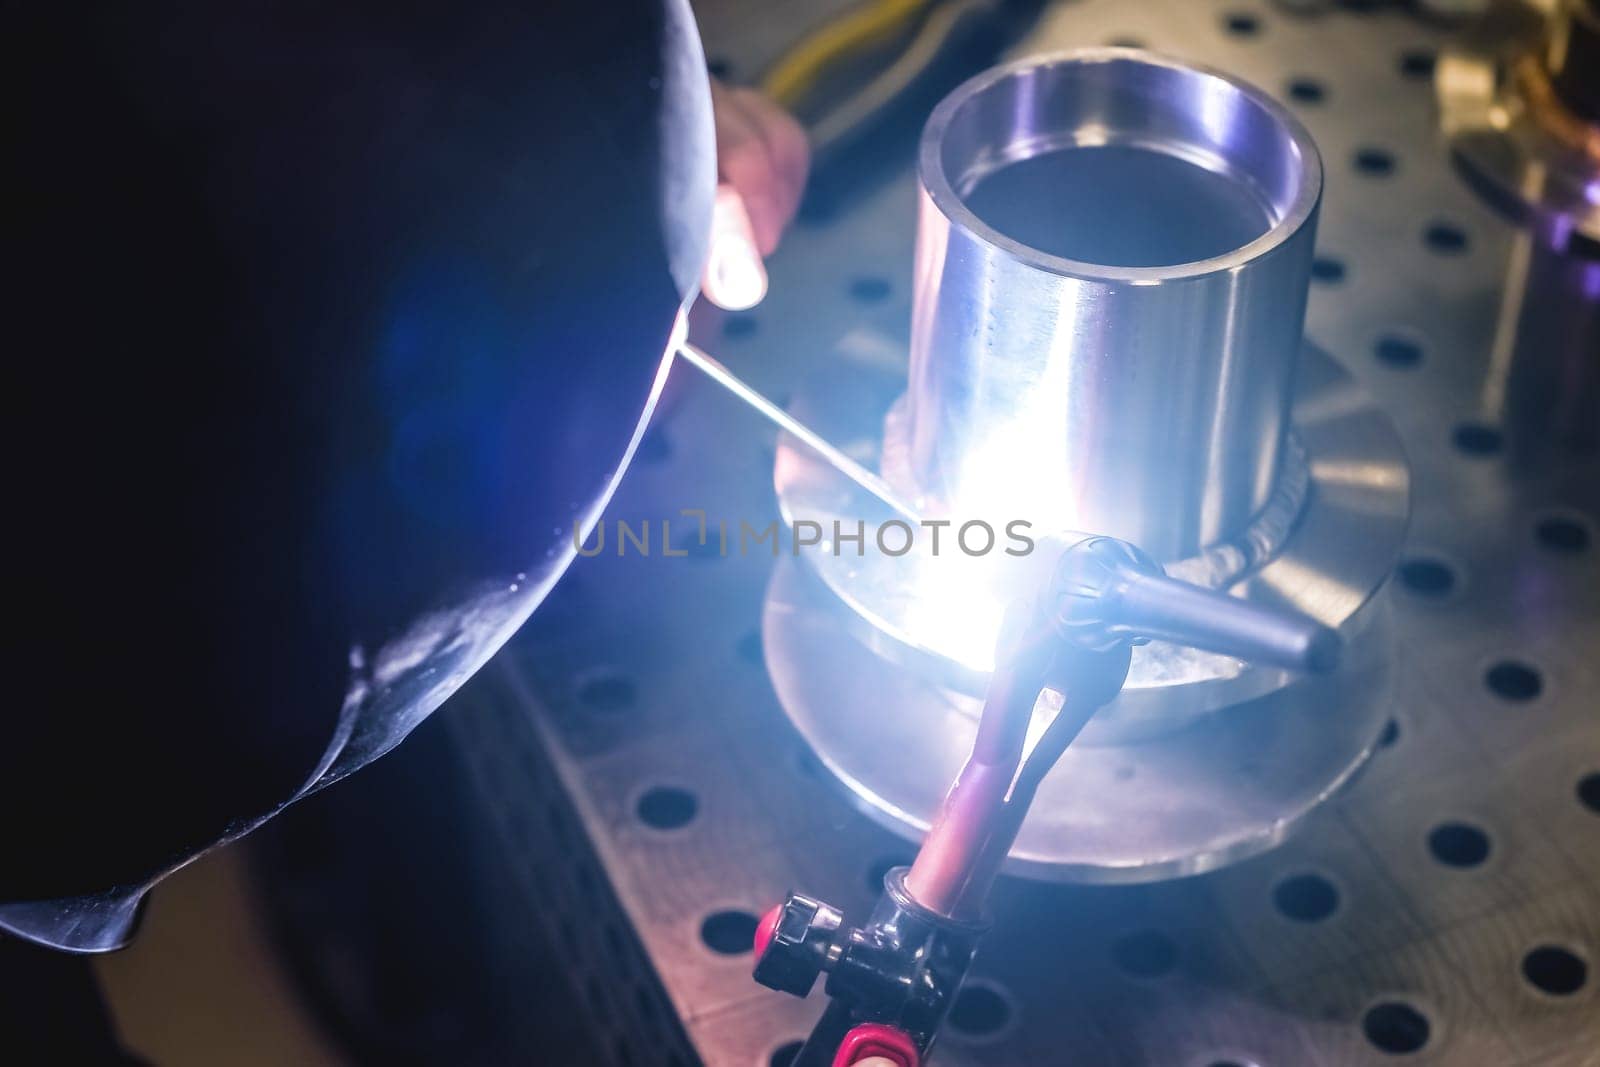 A welder makes a precision weld on a stainless-steel element. The element is used for professional kitchen equipment